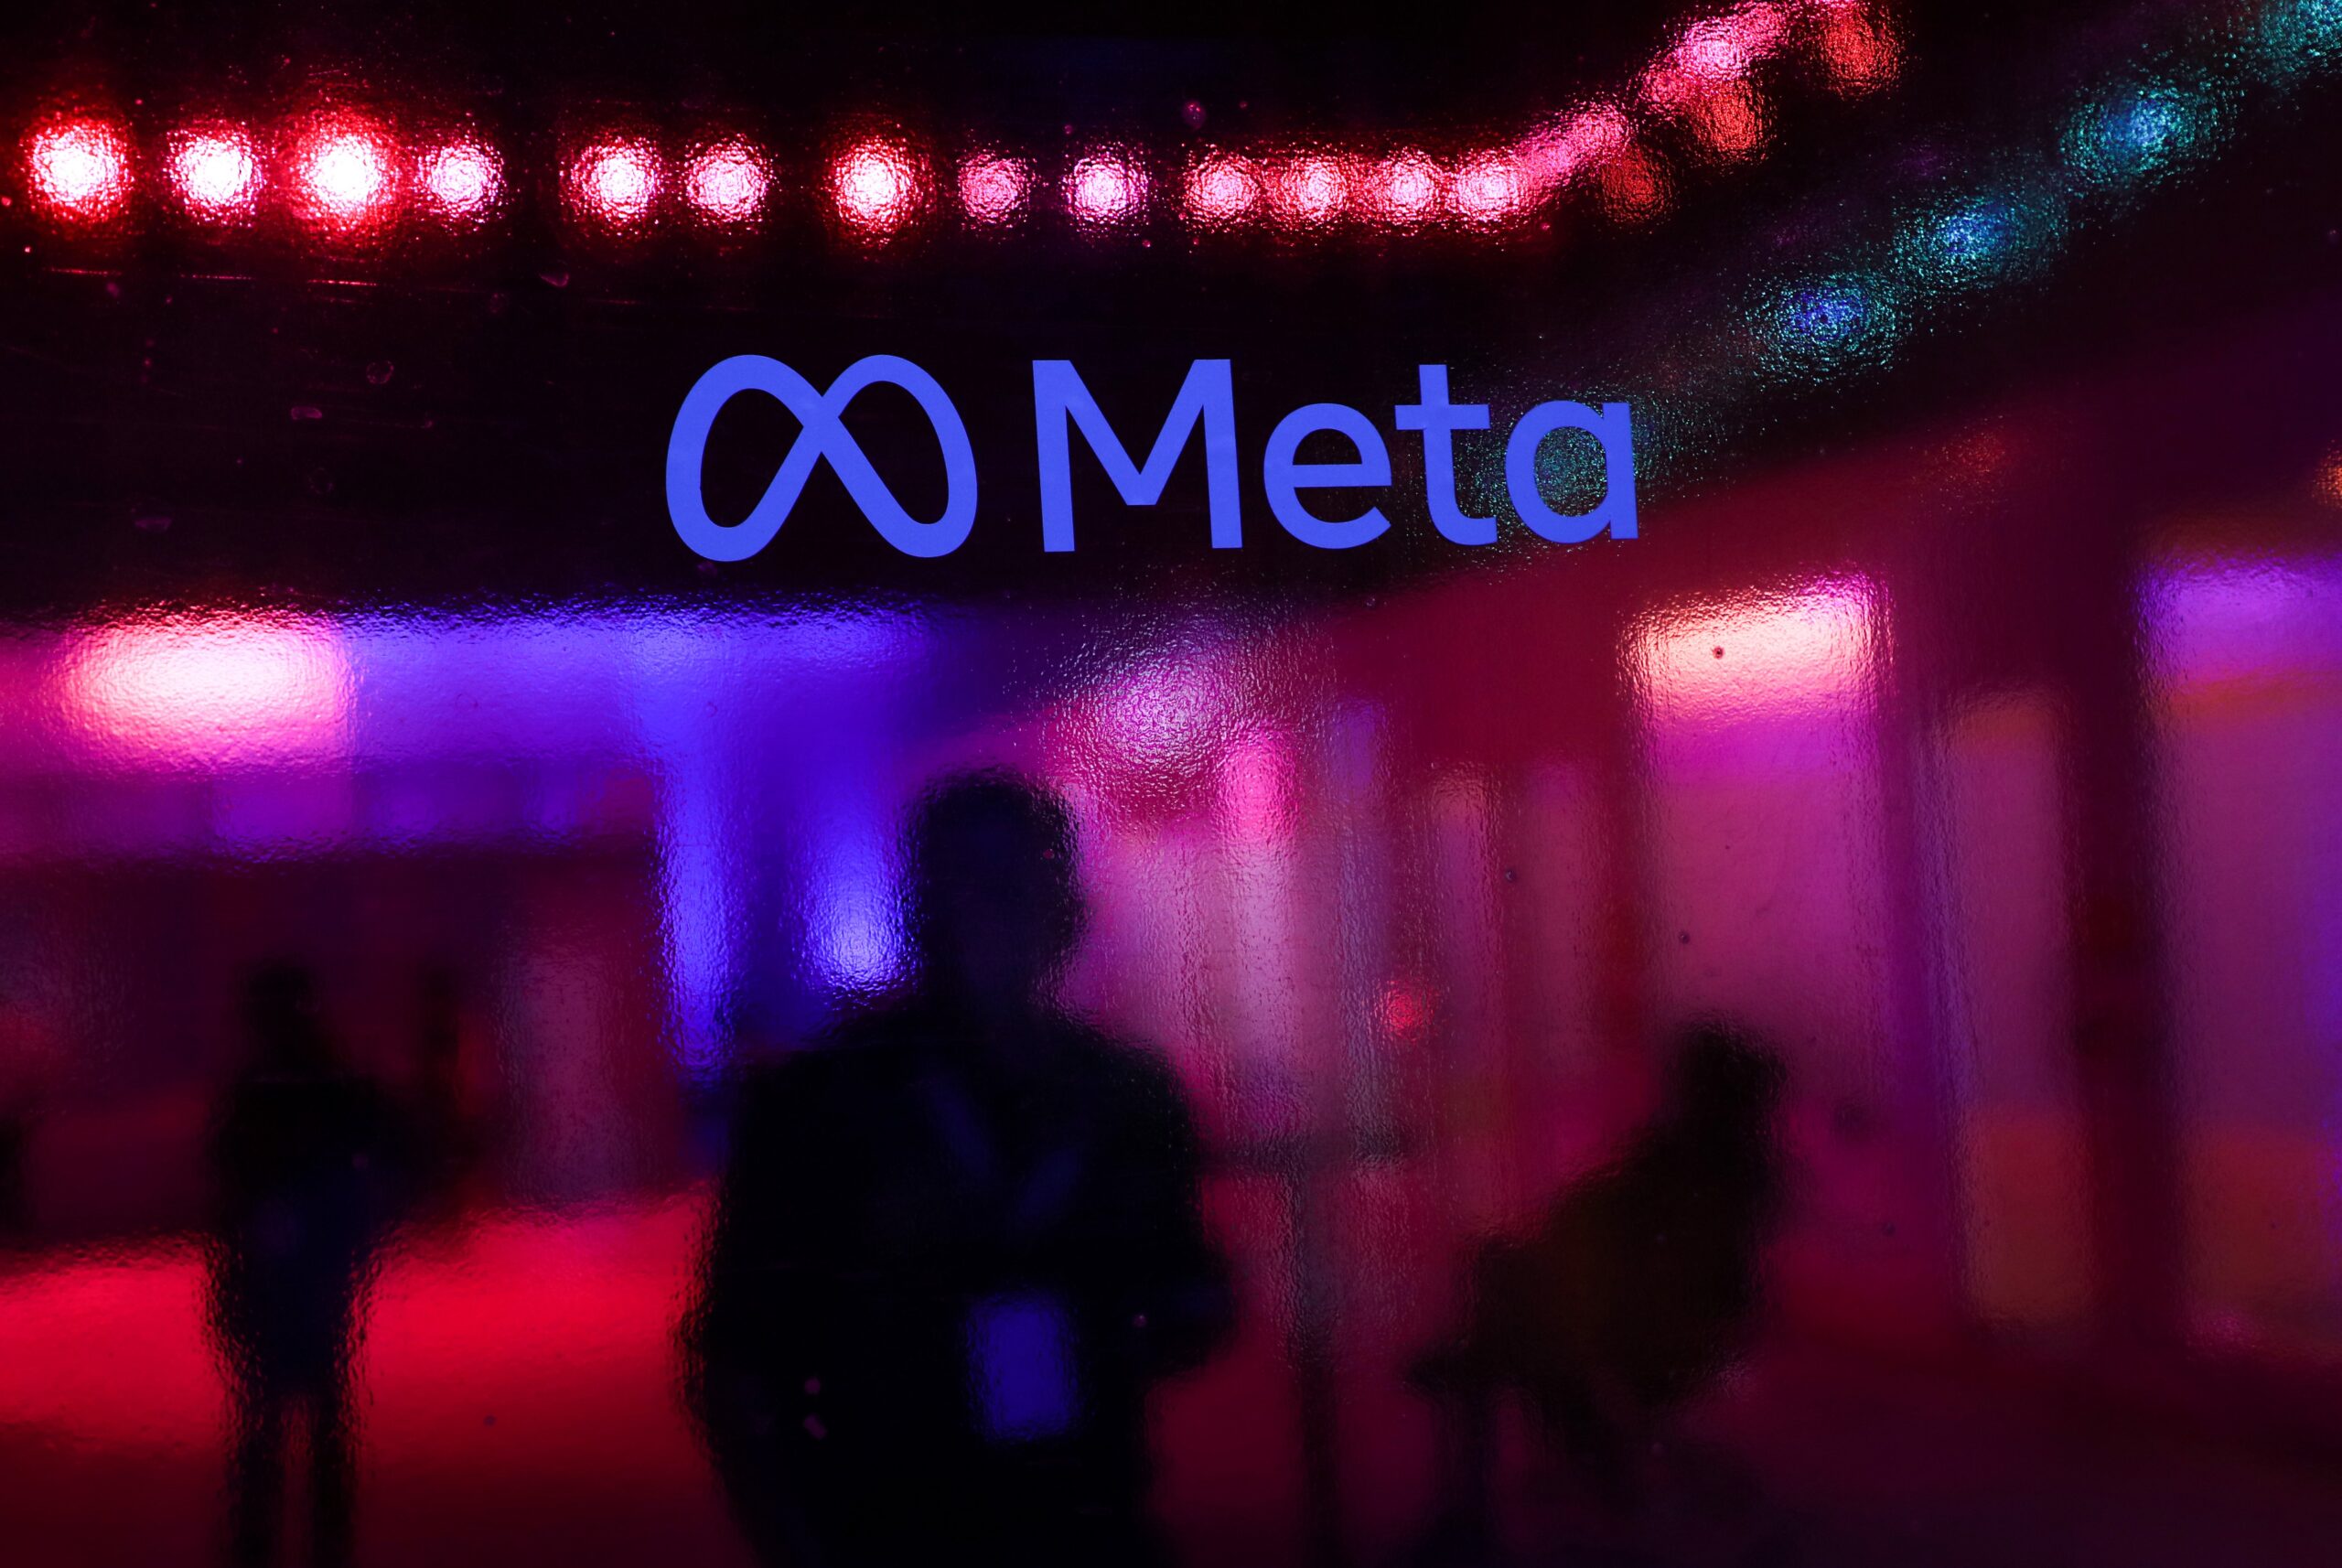 the Meta logo on a wall with a blurry reflected background